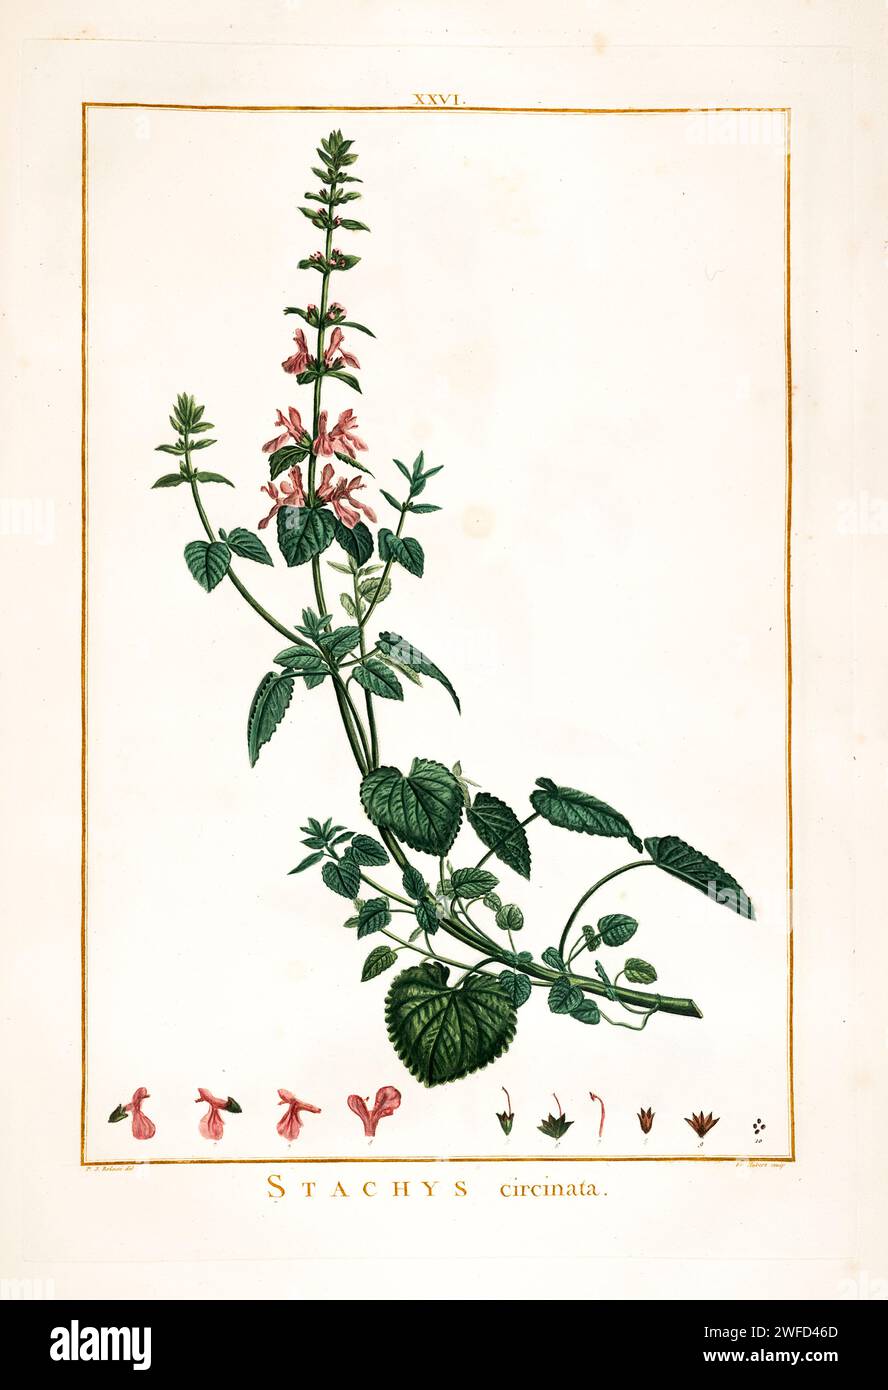 Stachys circinata (also called Round-leaved Hedge-nettle, among many other common names) is a perennial herbaceous plant native to the Mediterranean region. It has a woody base and narrow, linear leaves. It typically grows in dry, rocky habitats. Hand Painted by Pierre-Joseph Redouté in 1784 Stock Photo